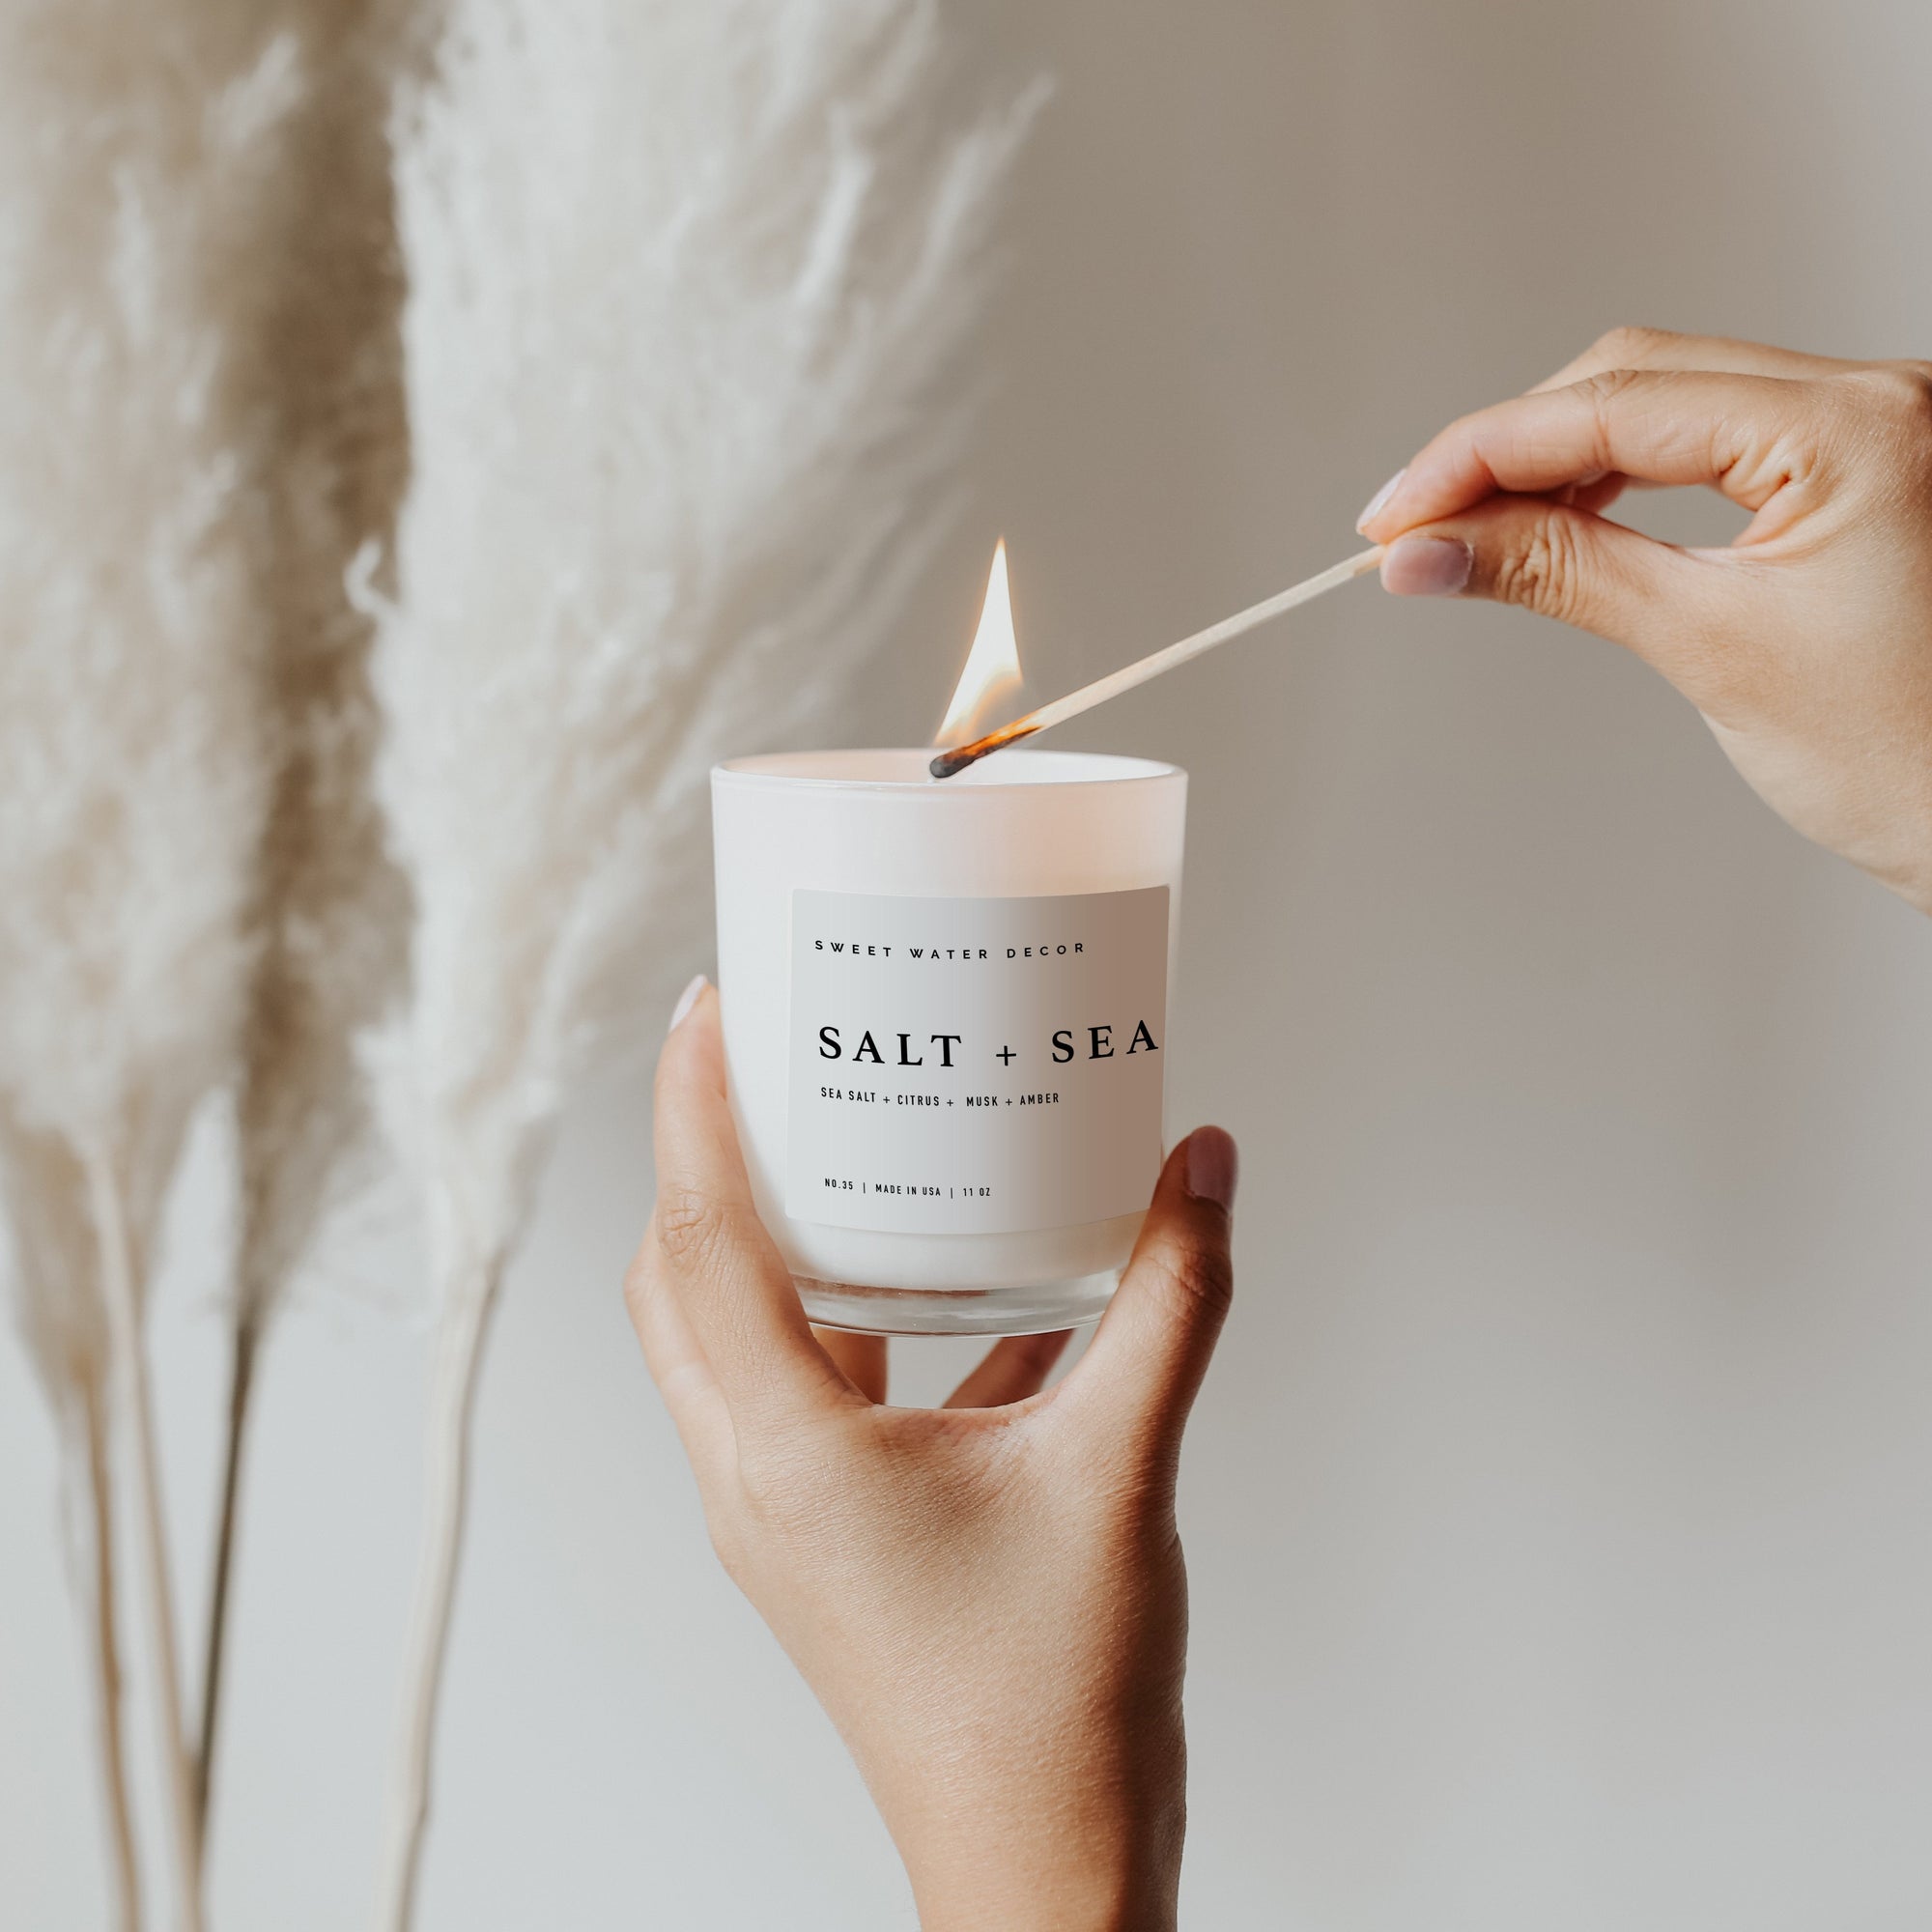 Our Salt & Sea Soy Candle is expertly crafted with a sophisticated scent, perfect for those who appreciate coastal living.